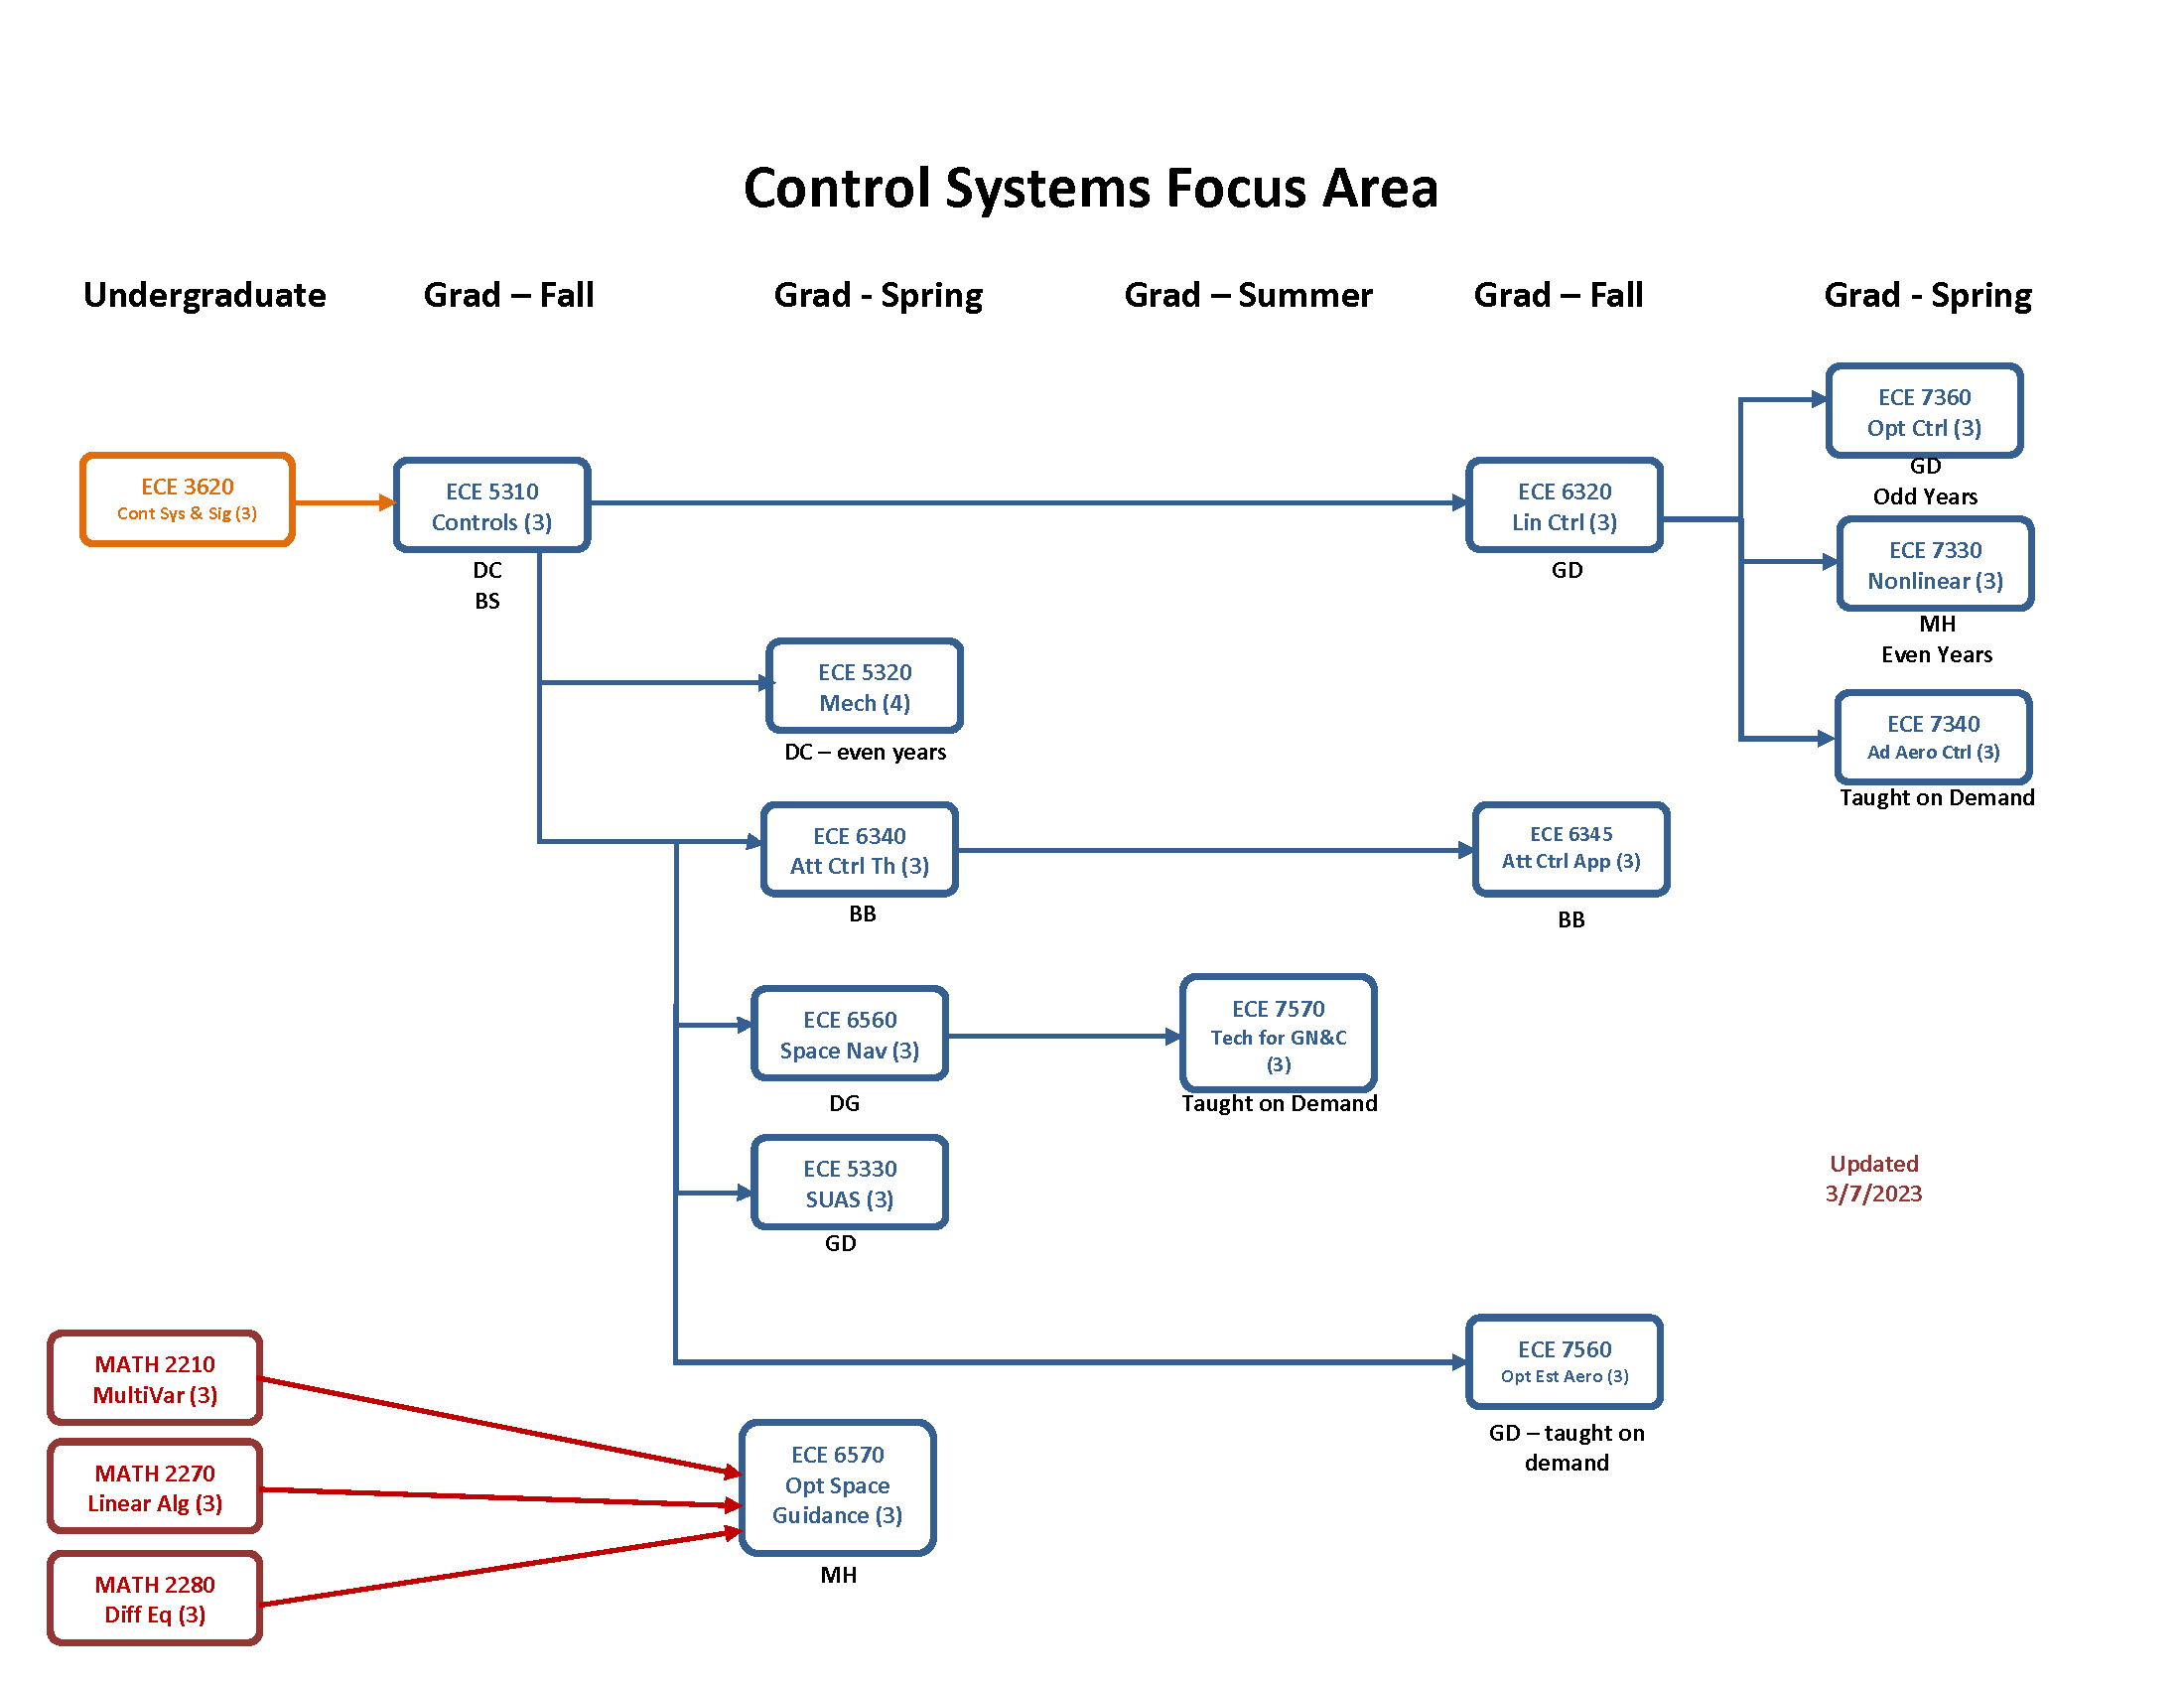 Control Systems Focus Area flow chart